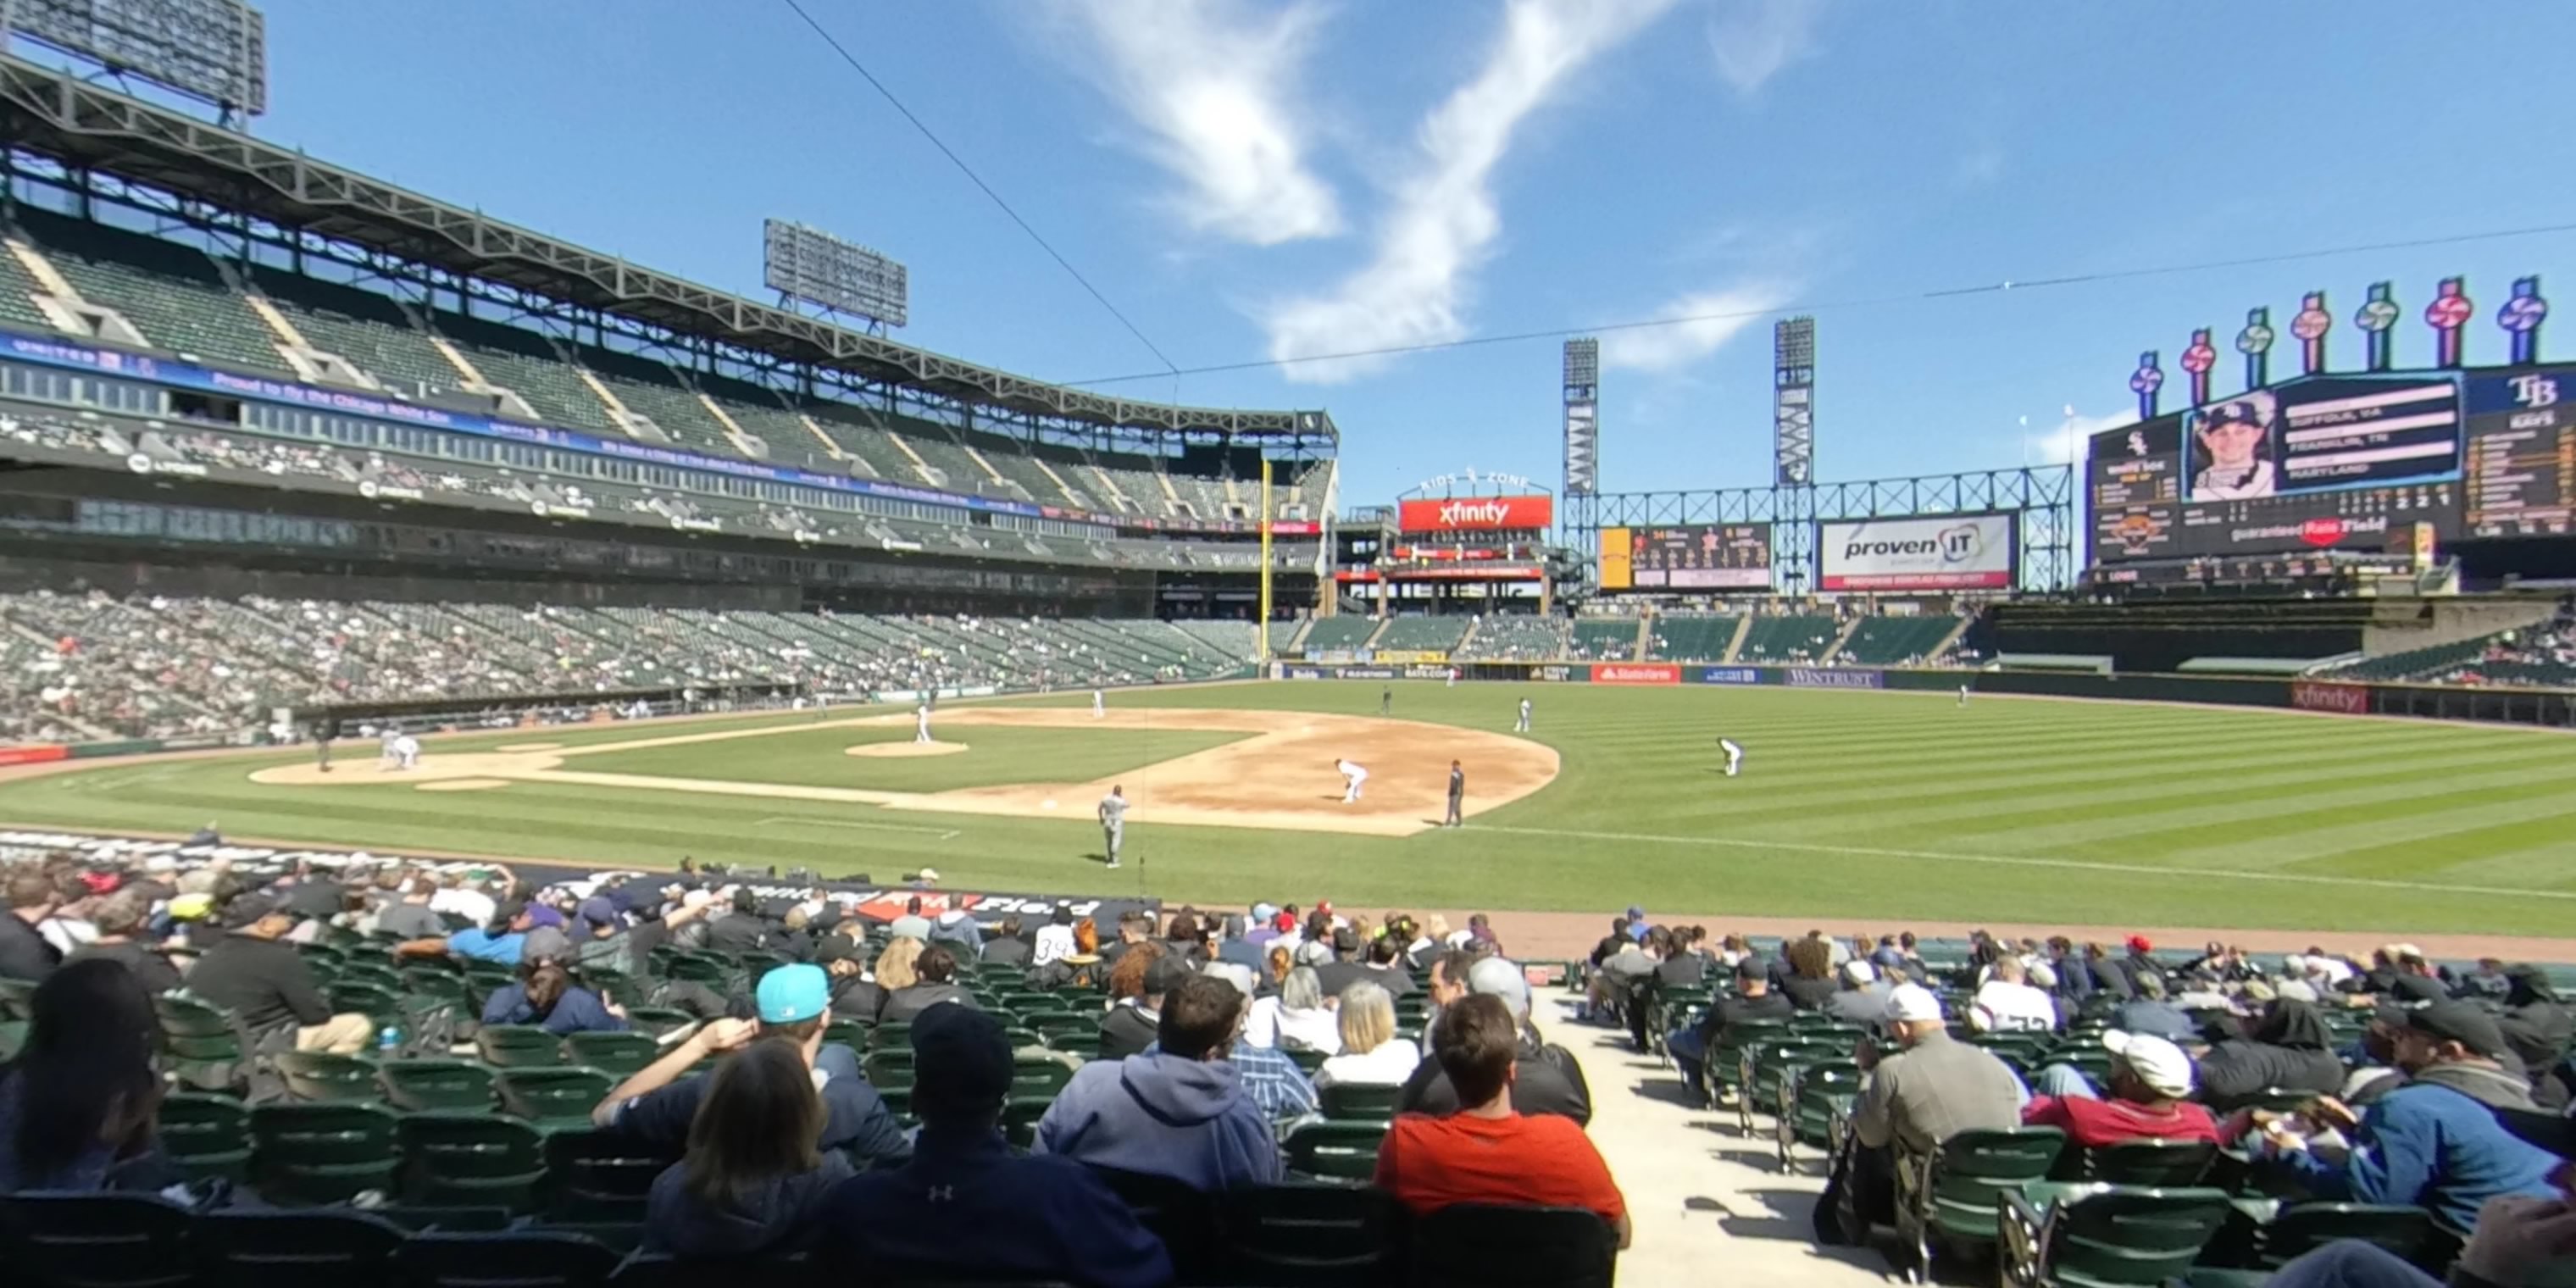 Section 120 at Guaranteed Rate Field 